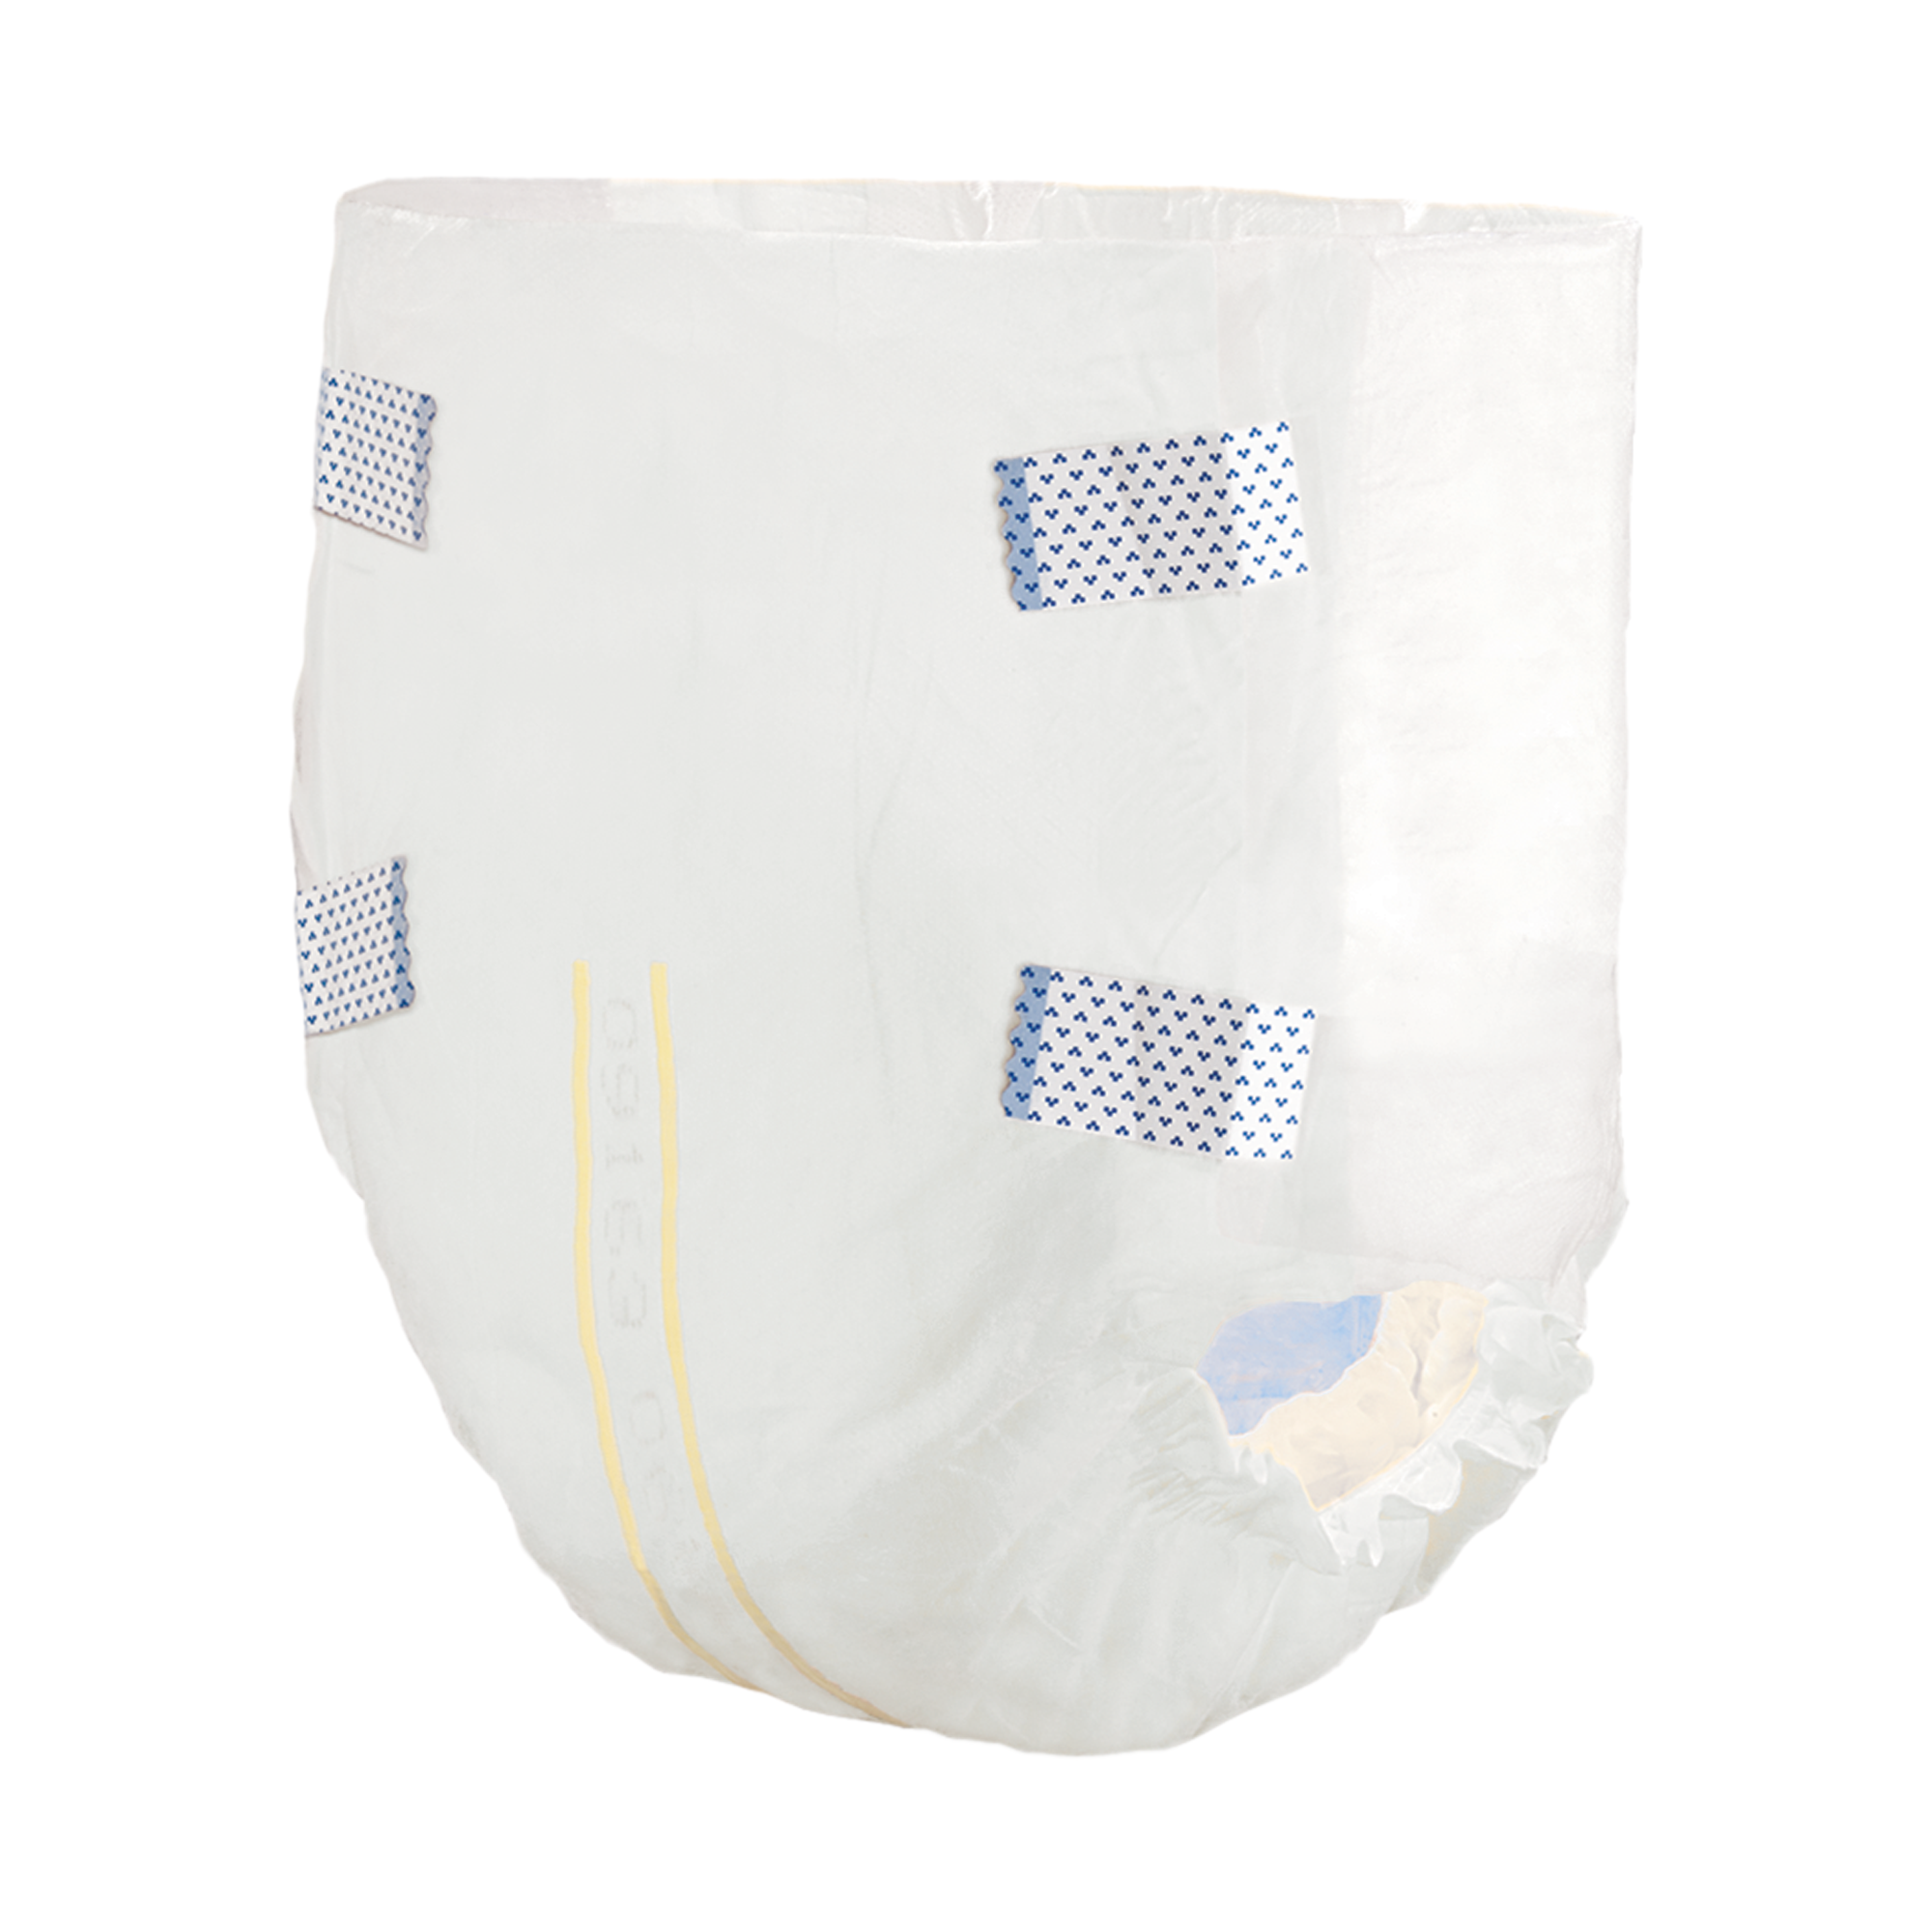 Tranquility Briefs & Adult Diapers with Tabs - Tranquility Products